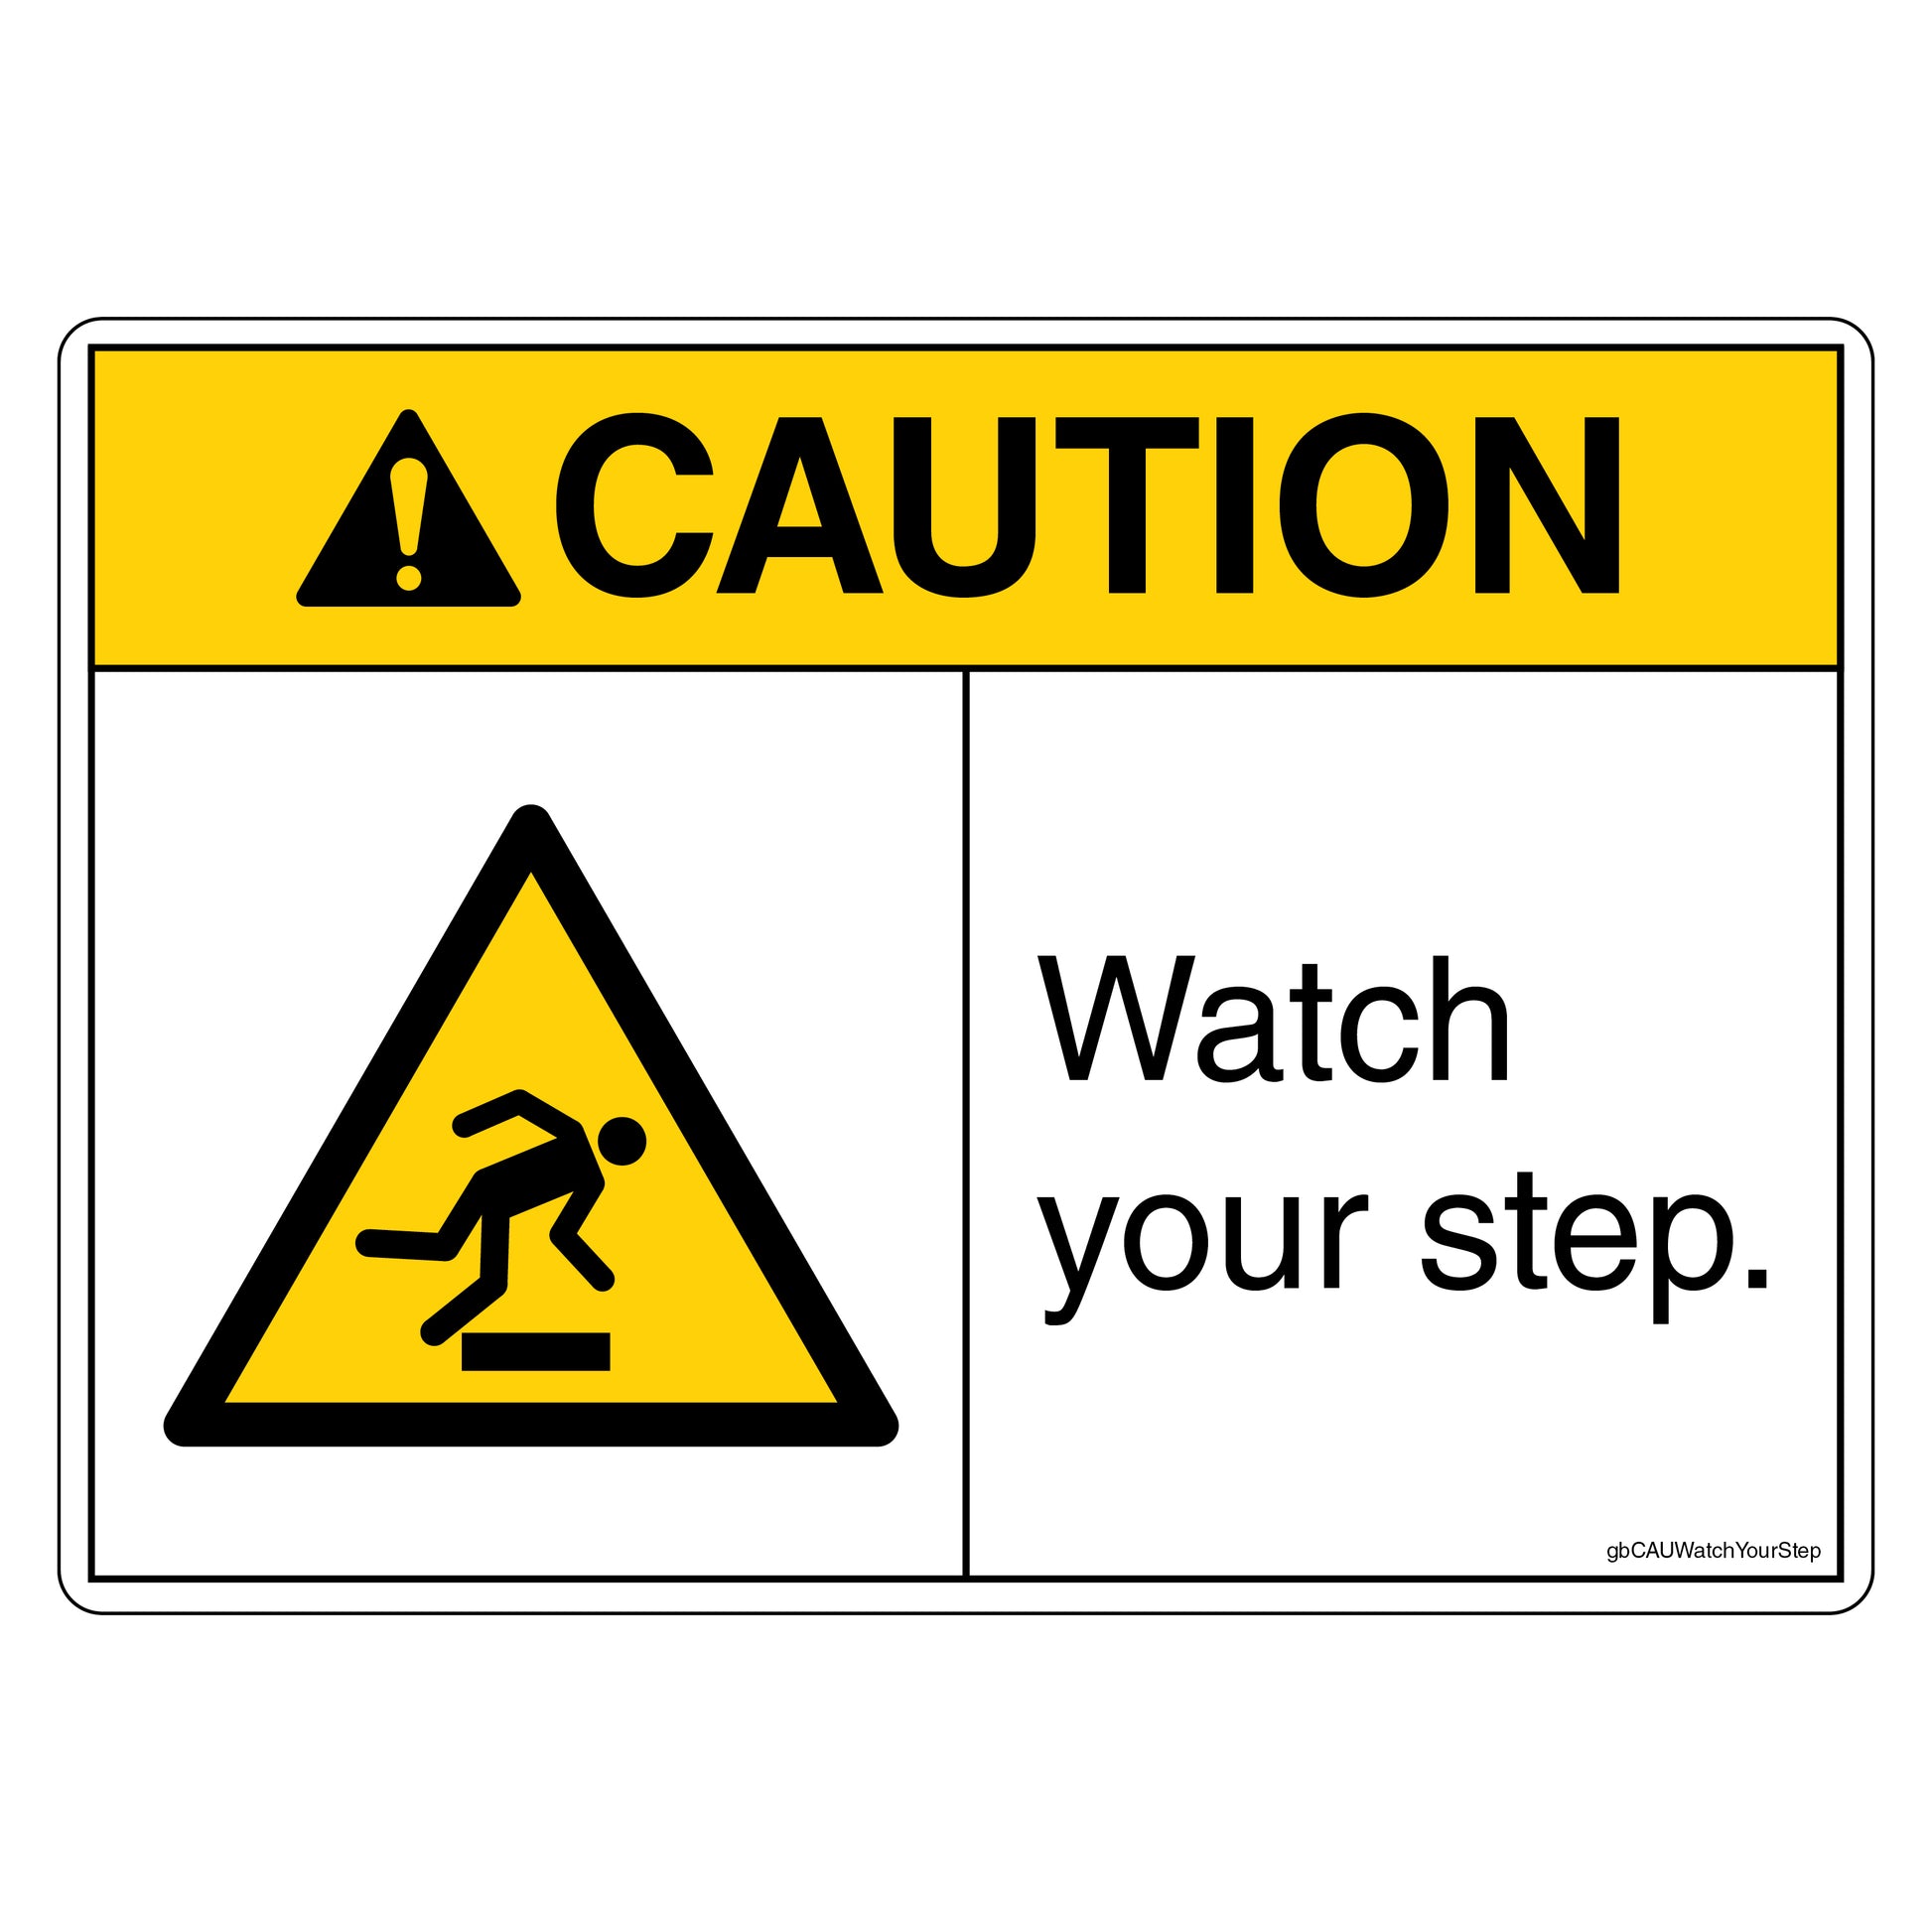 Caution Watch Your Step Decal. 